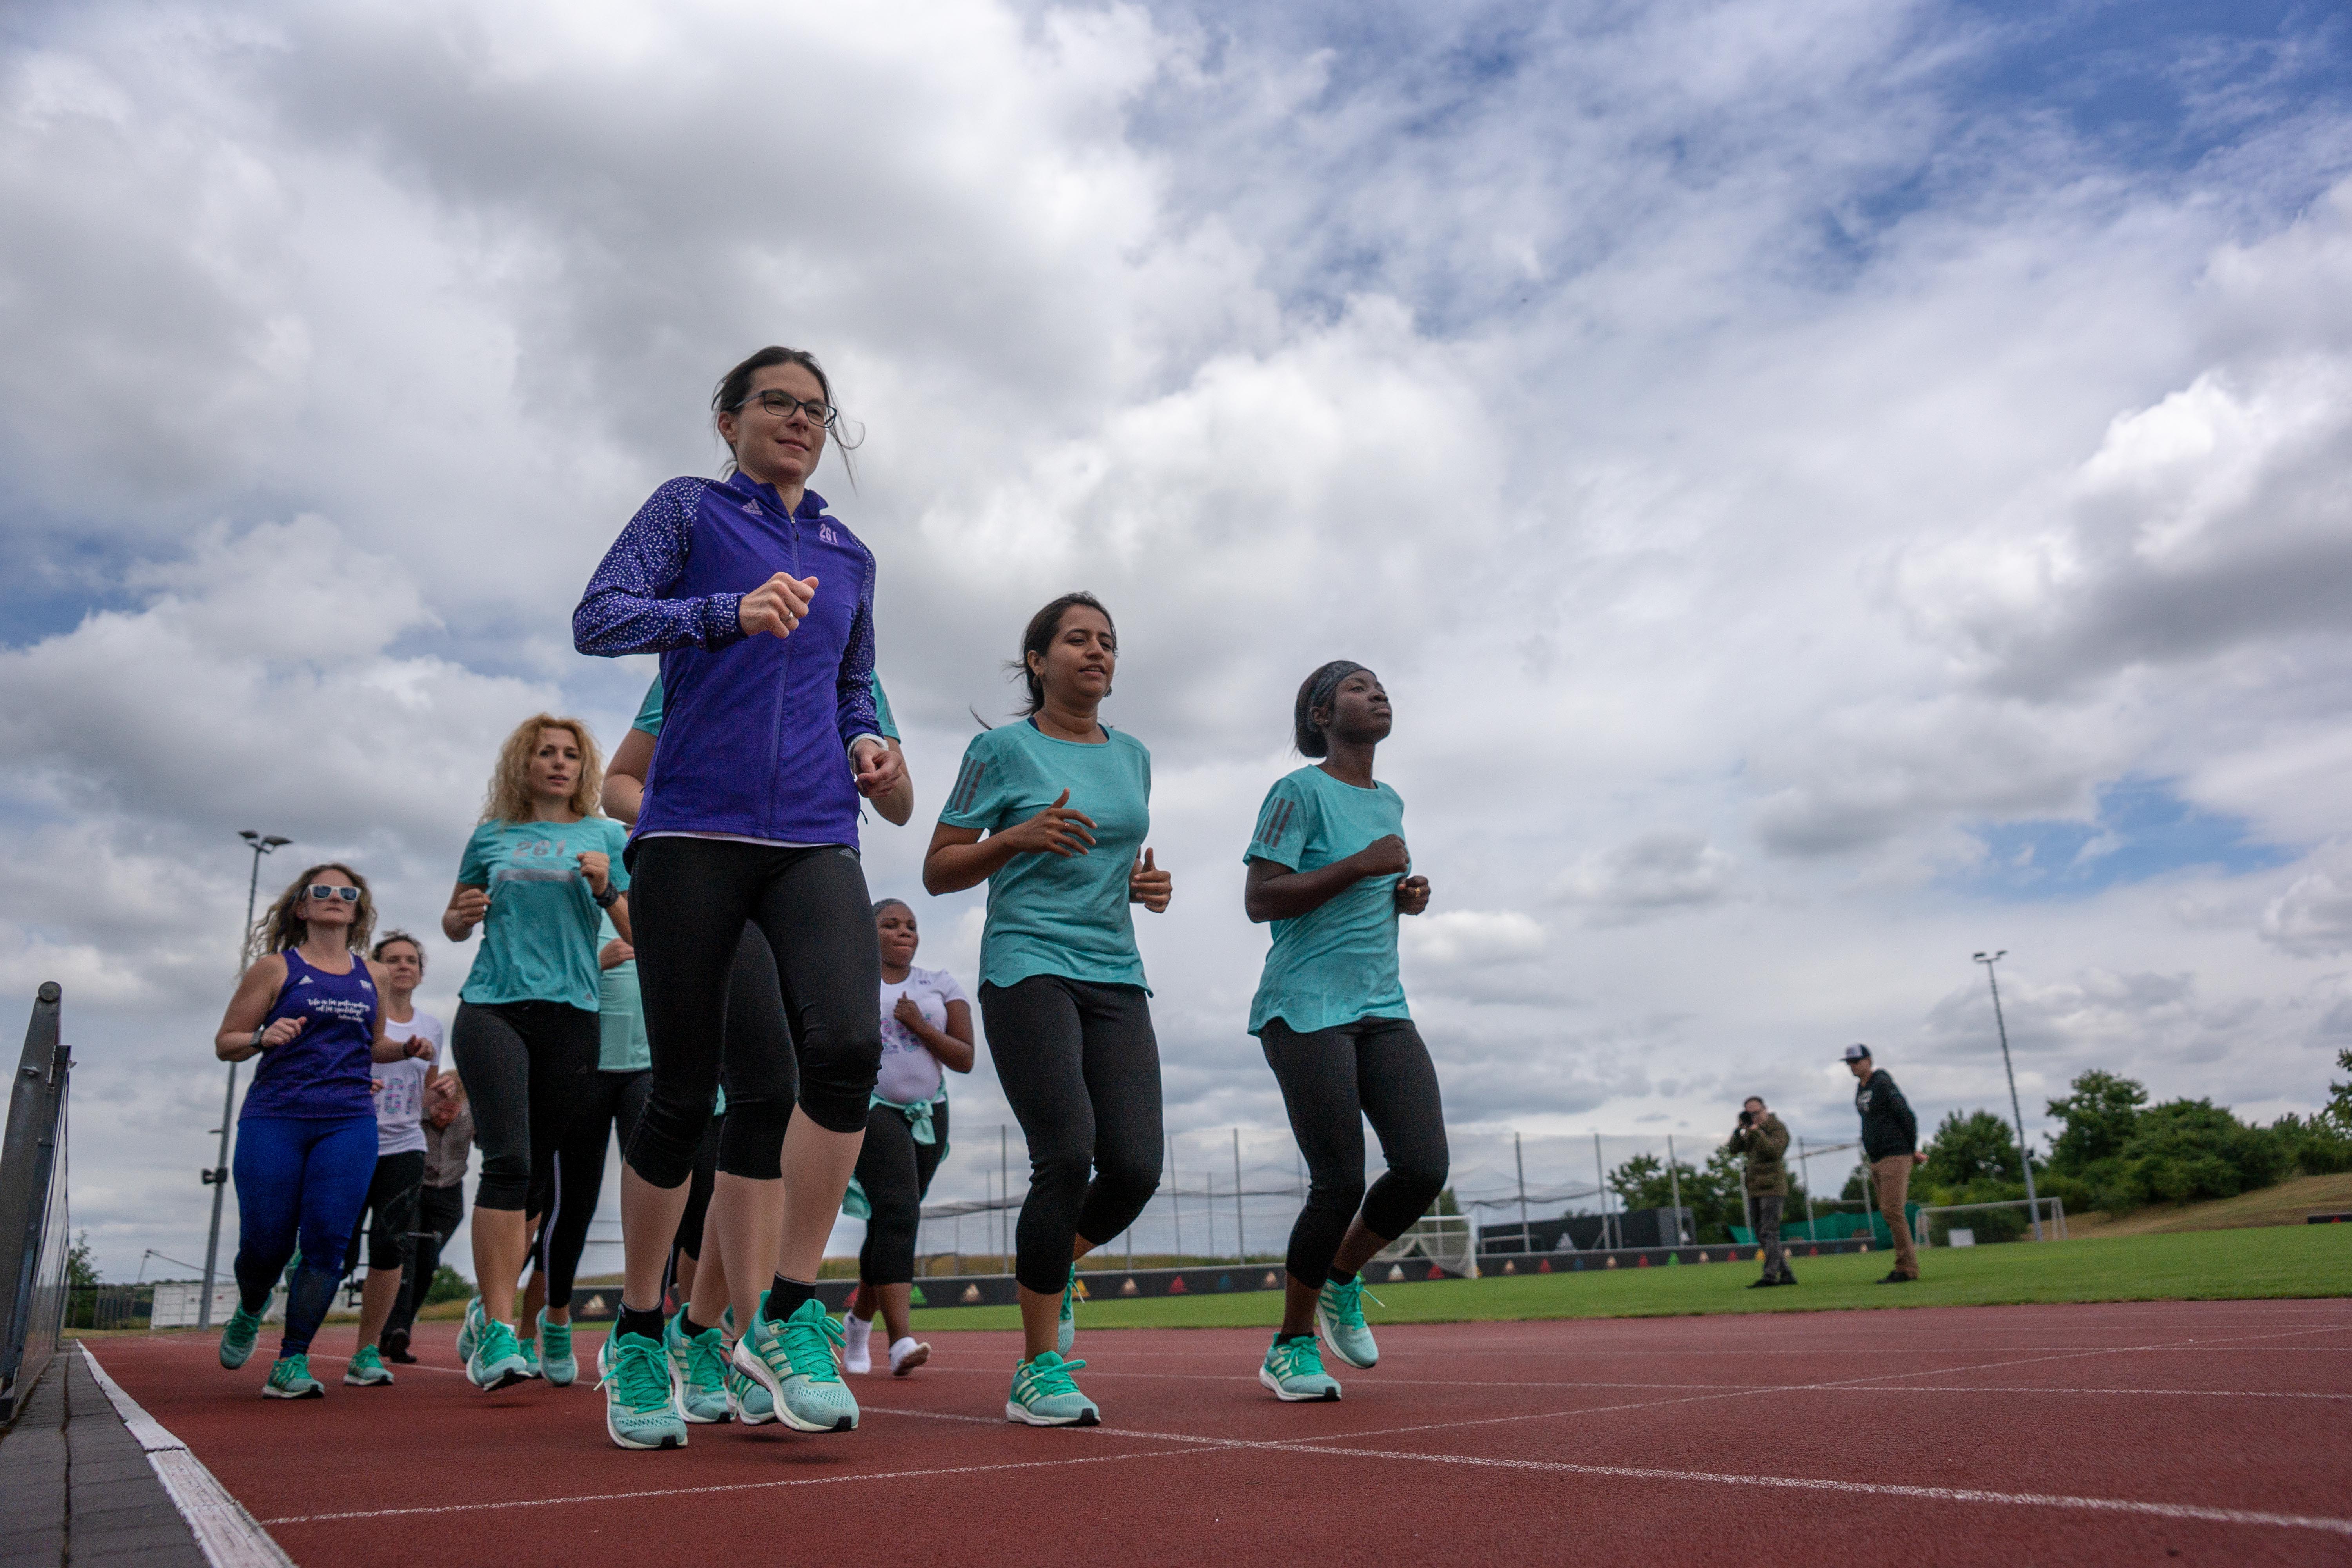 Women of the 261 Fearless running group in action on a running track, photographed under a cloudy sky during a training run